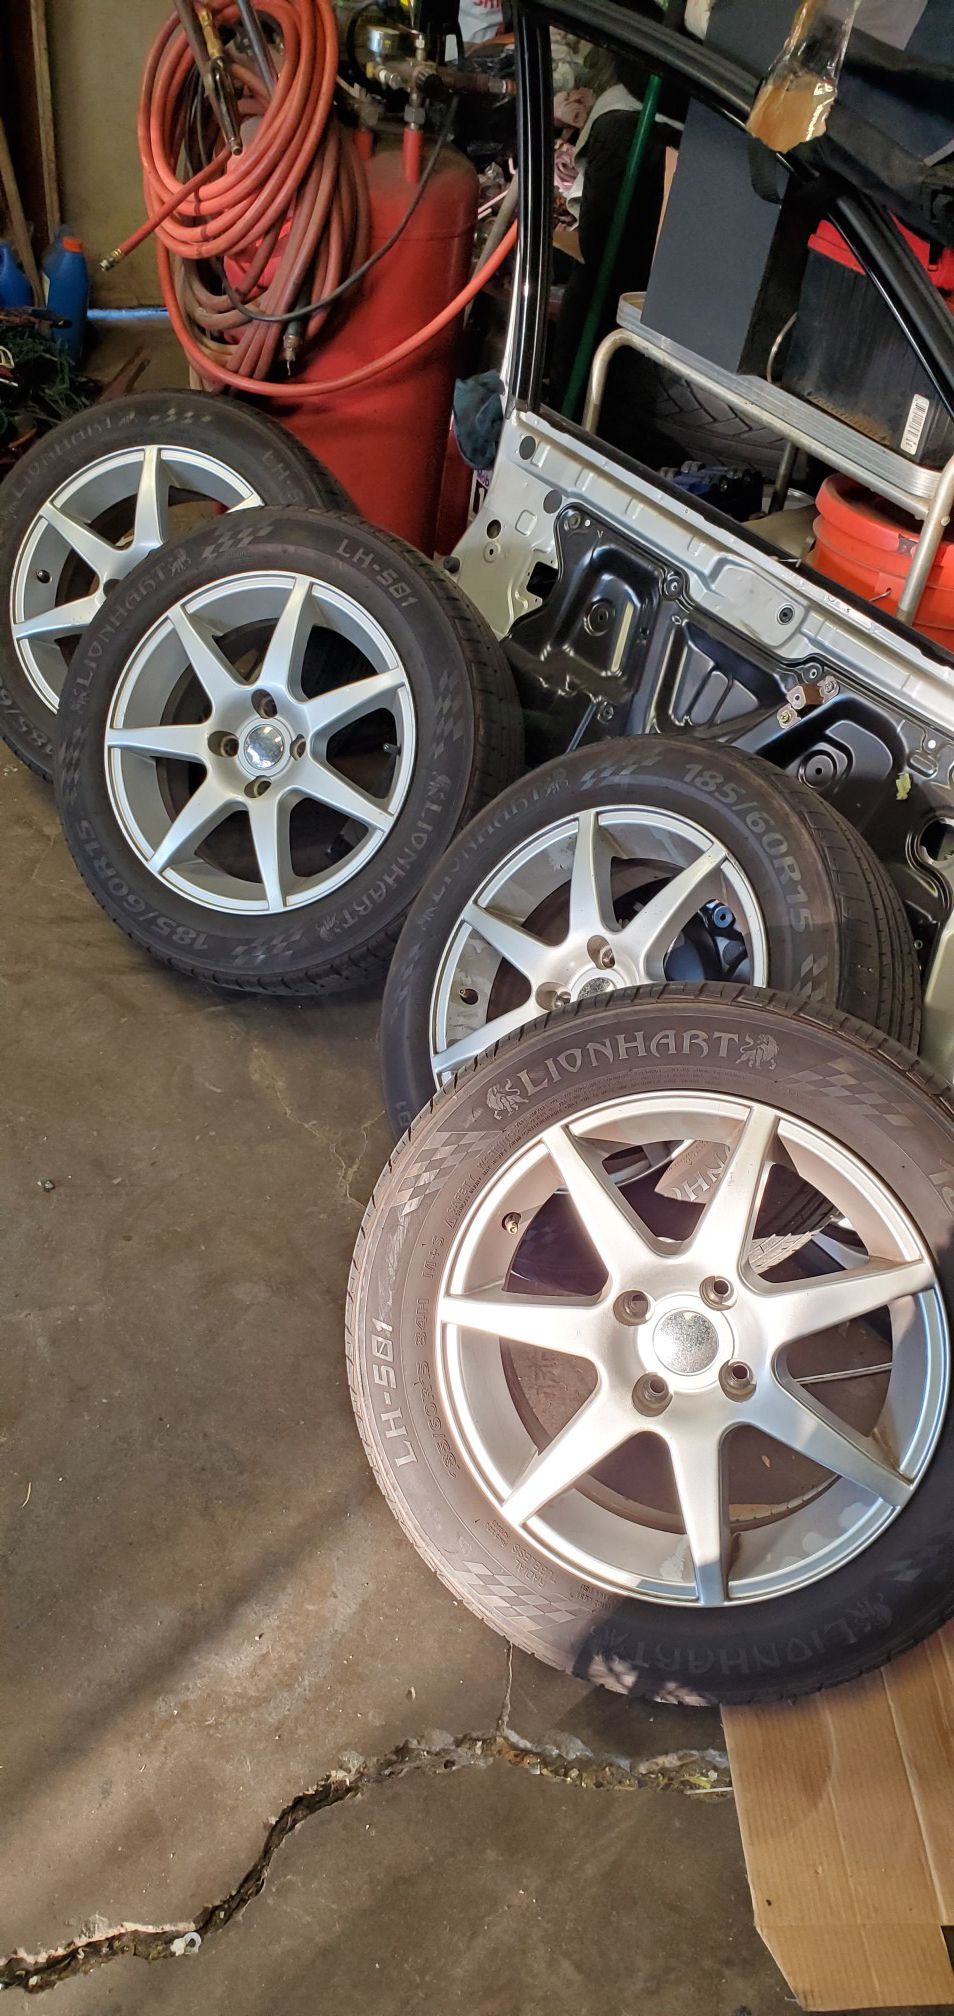 Scion xb wheels 4x100 185/60/15 some curb rash on 2 rims 2 tires are worn other 2 are good